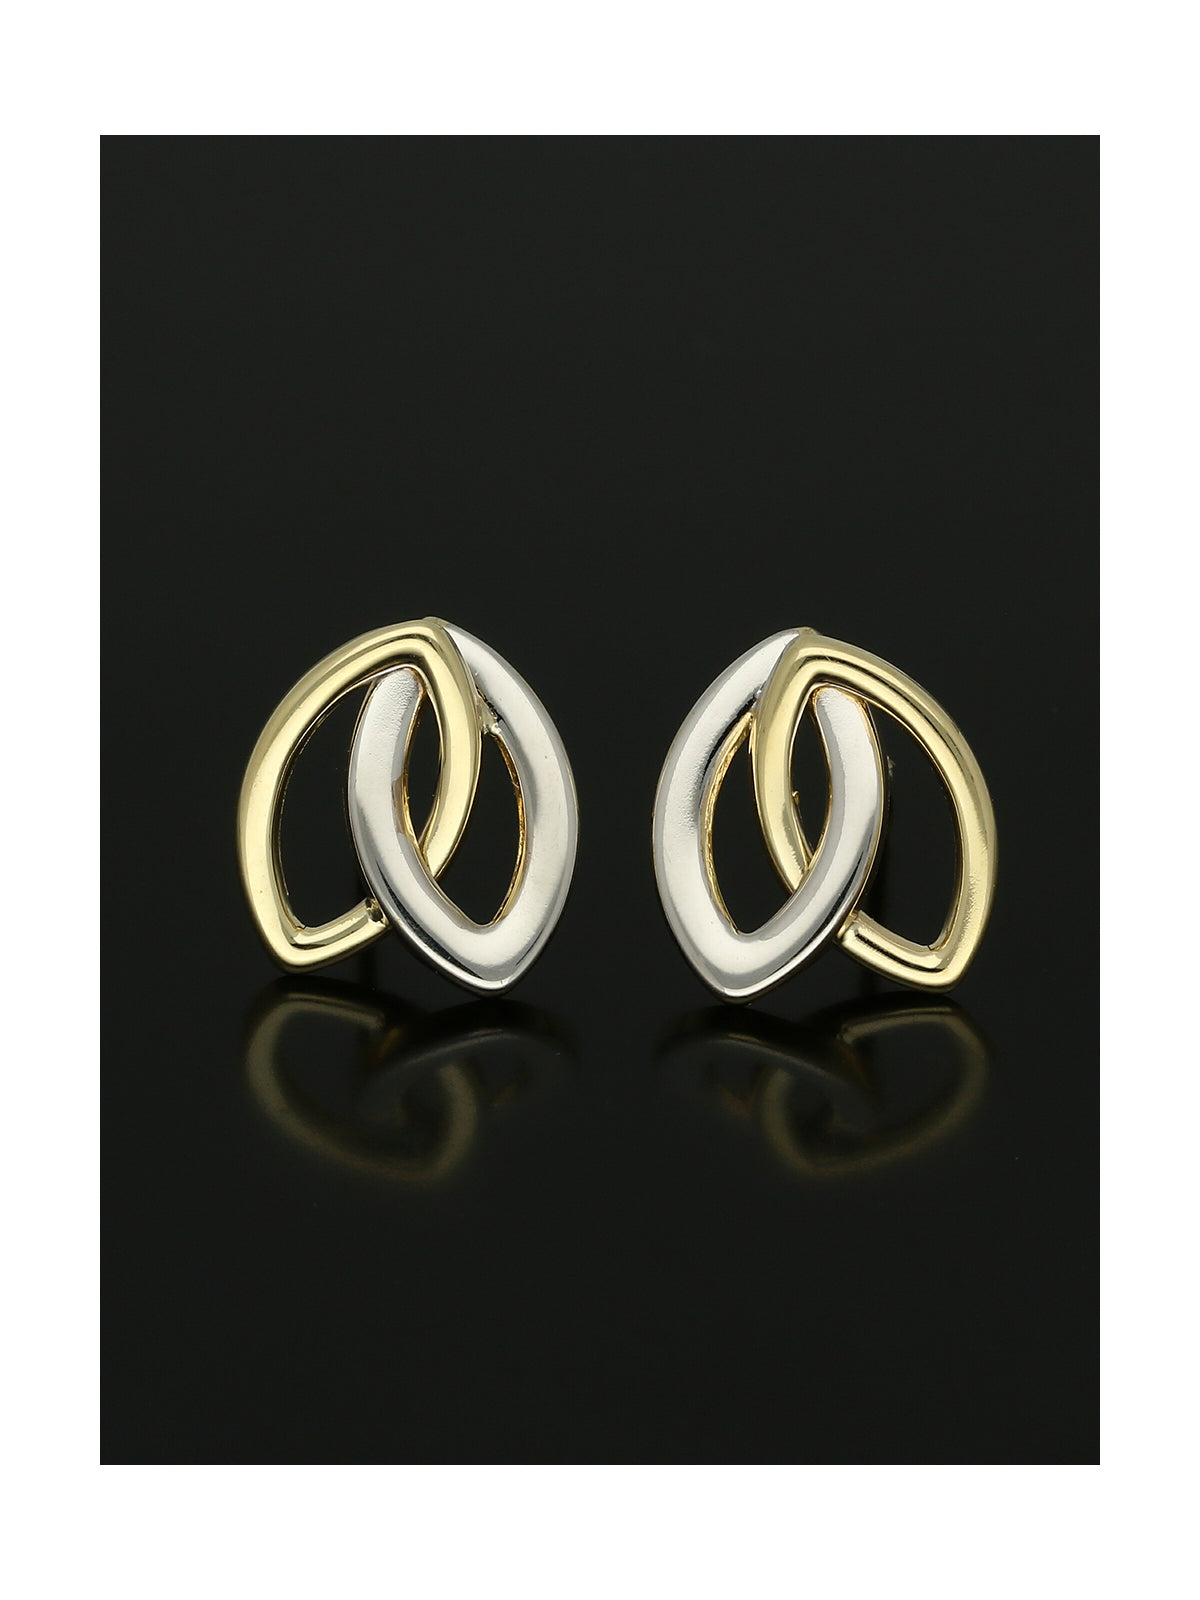 Entwined Open Oval Stud Earrings in 9ct Yellow and White Gold